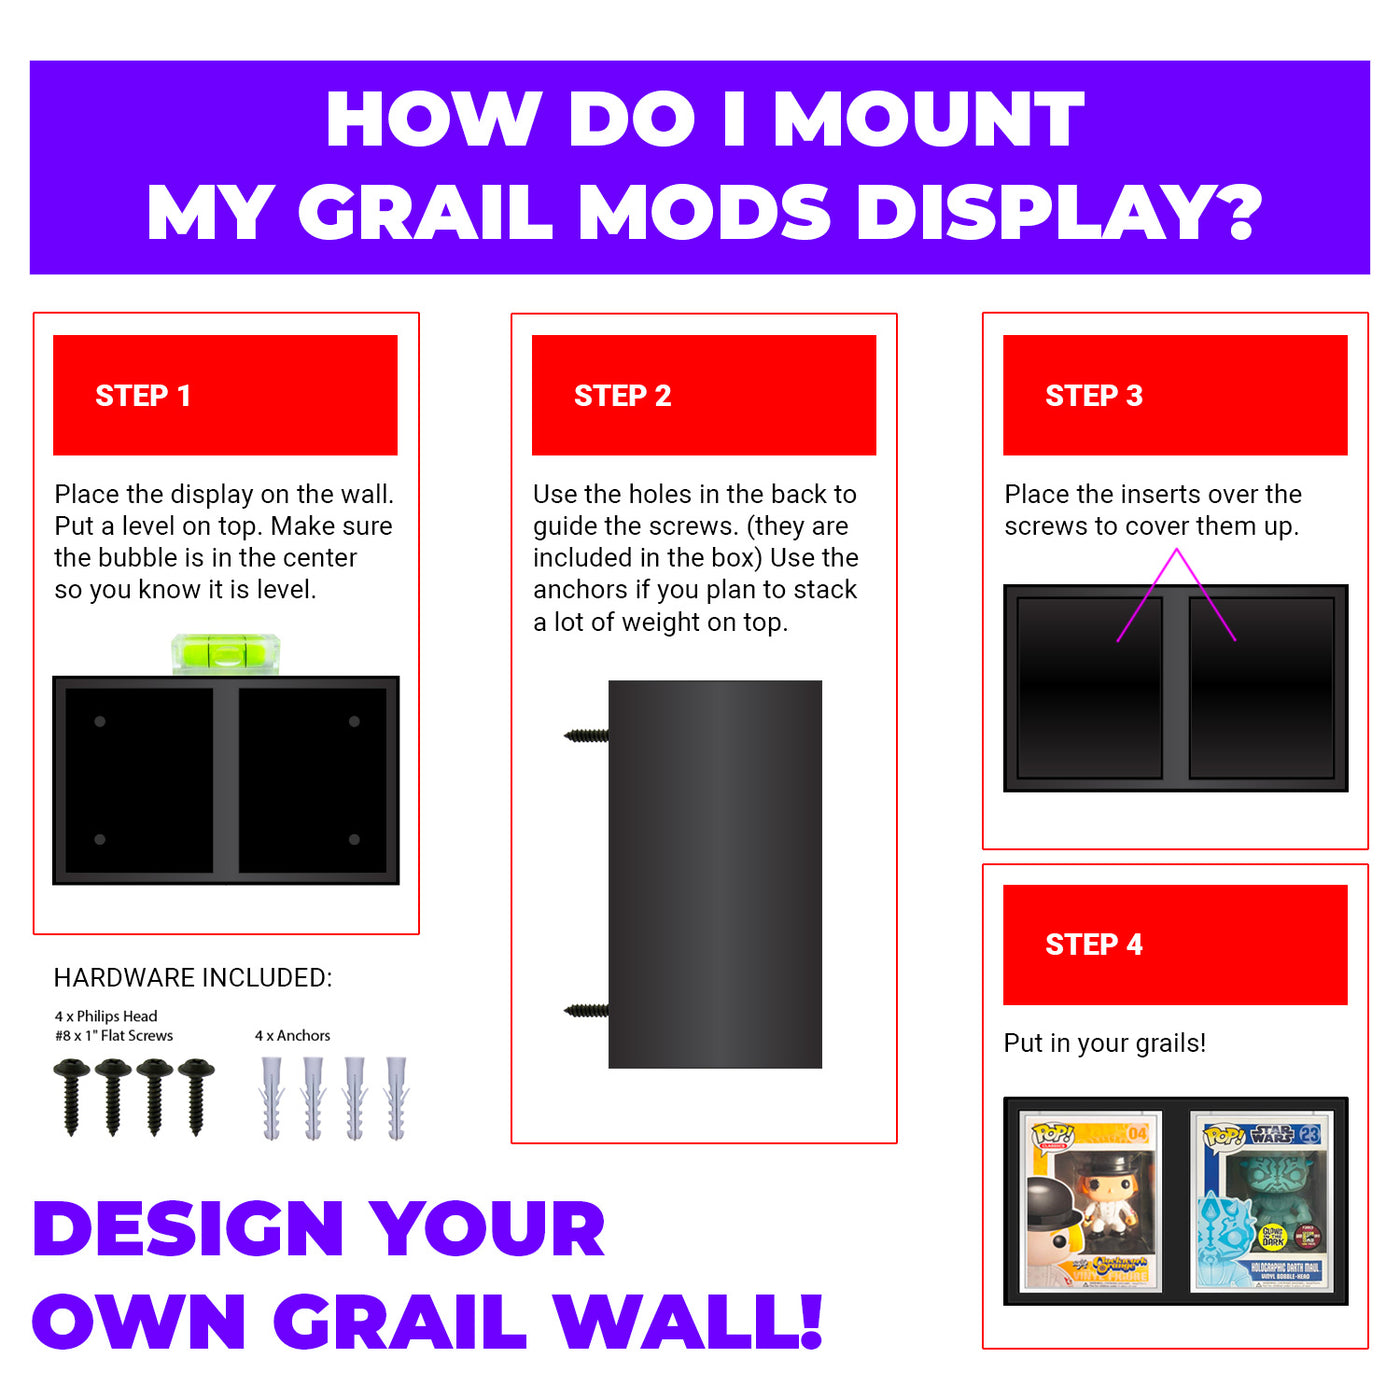 How to Mount Instructions - Display Geek Grail Mods The Best Funko Pop Vinyl Display Case for Pop Shield Armor Hard Stacks DIY Vaulted Grail Wall Cubbies